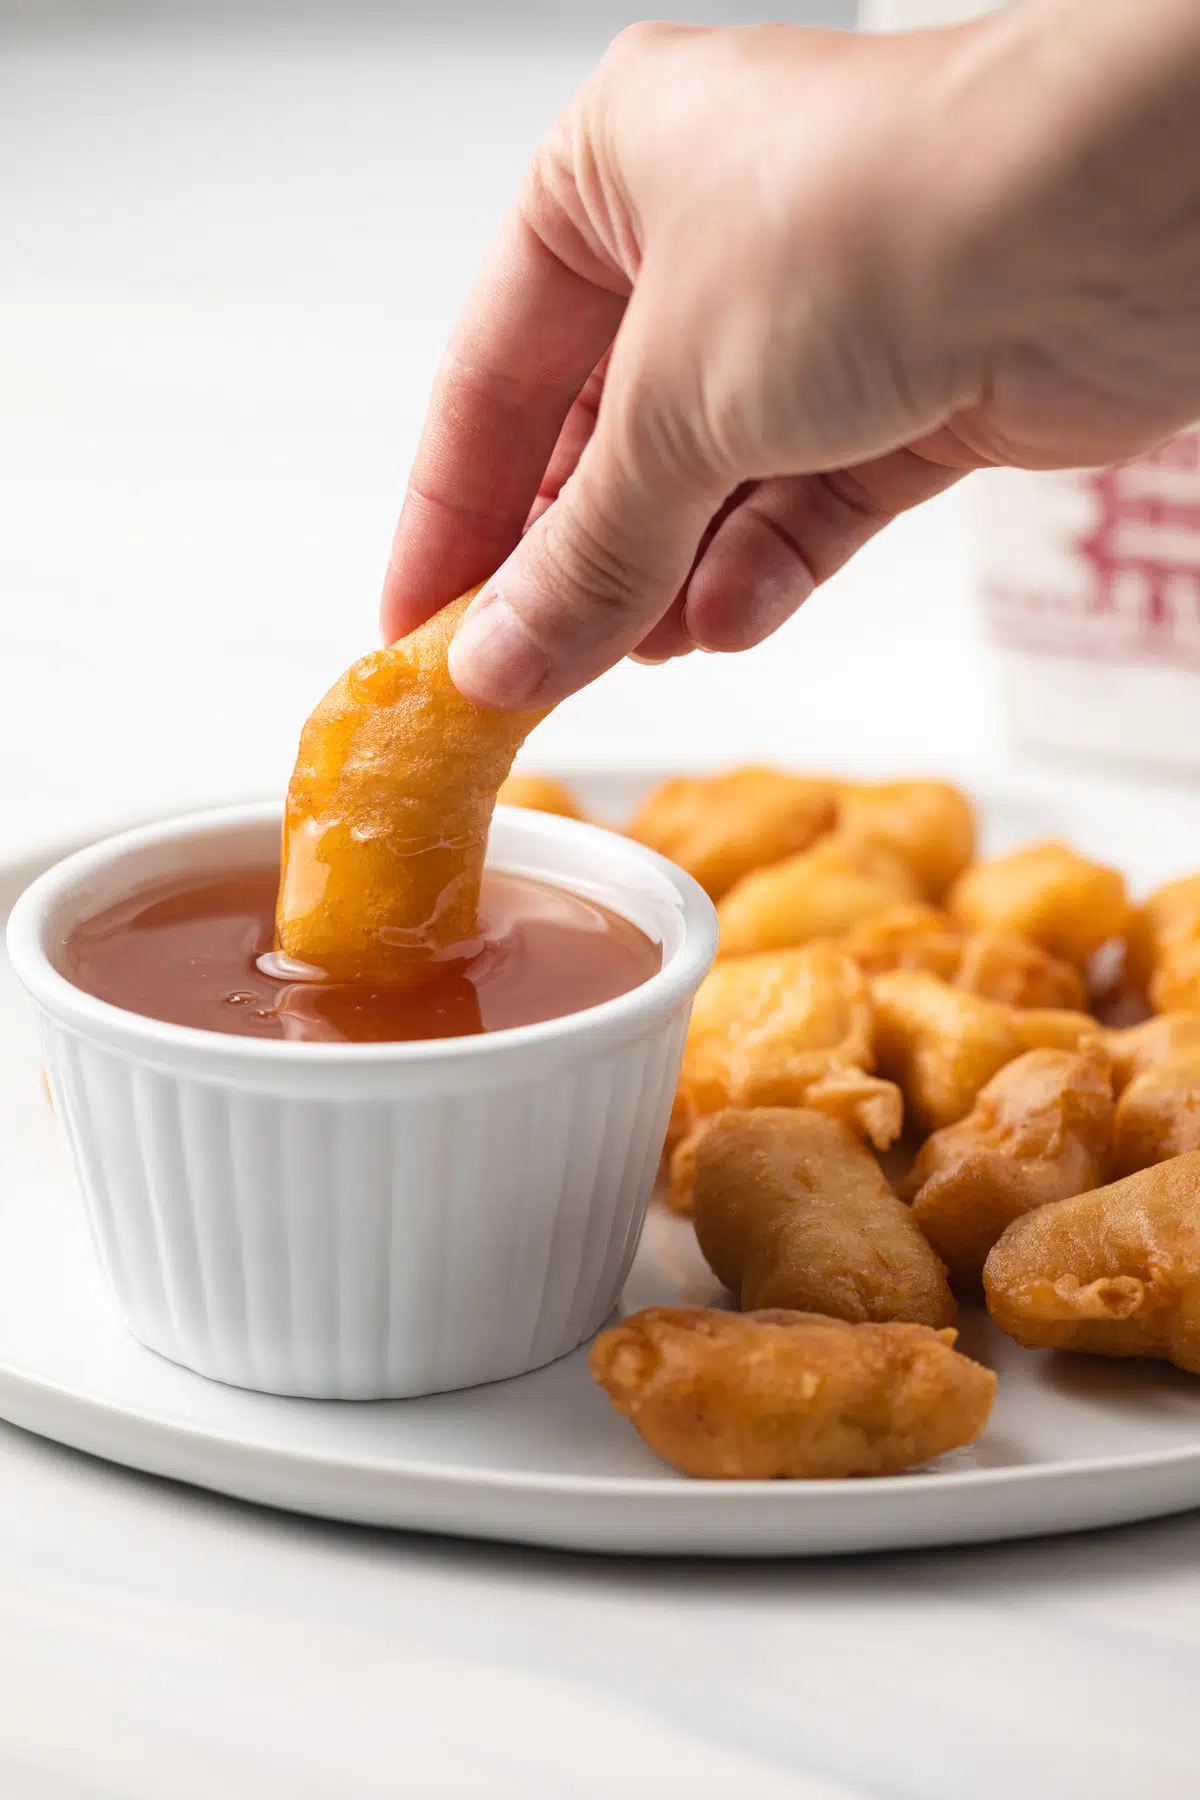 Dipping chicken into sweet and sour sauce.